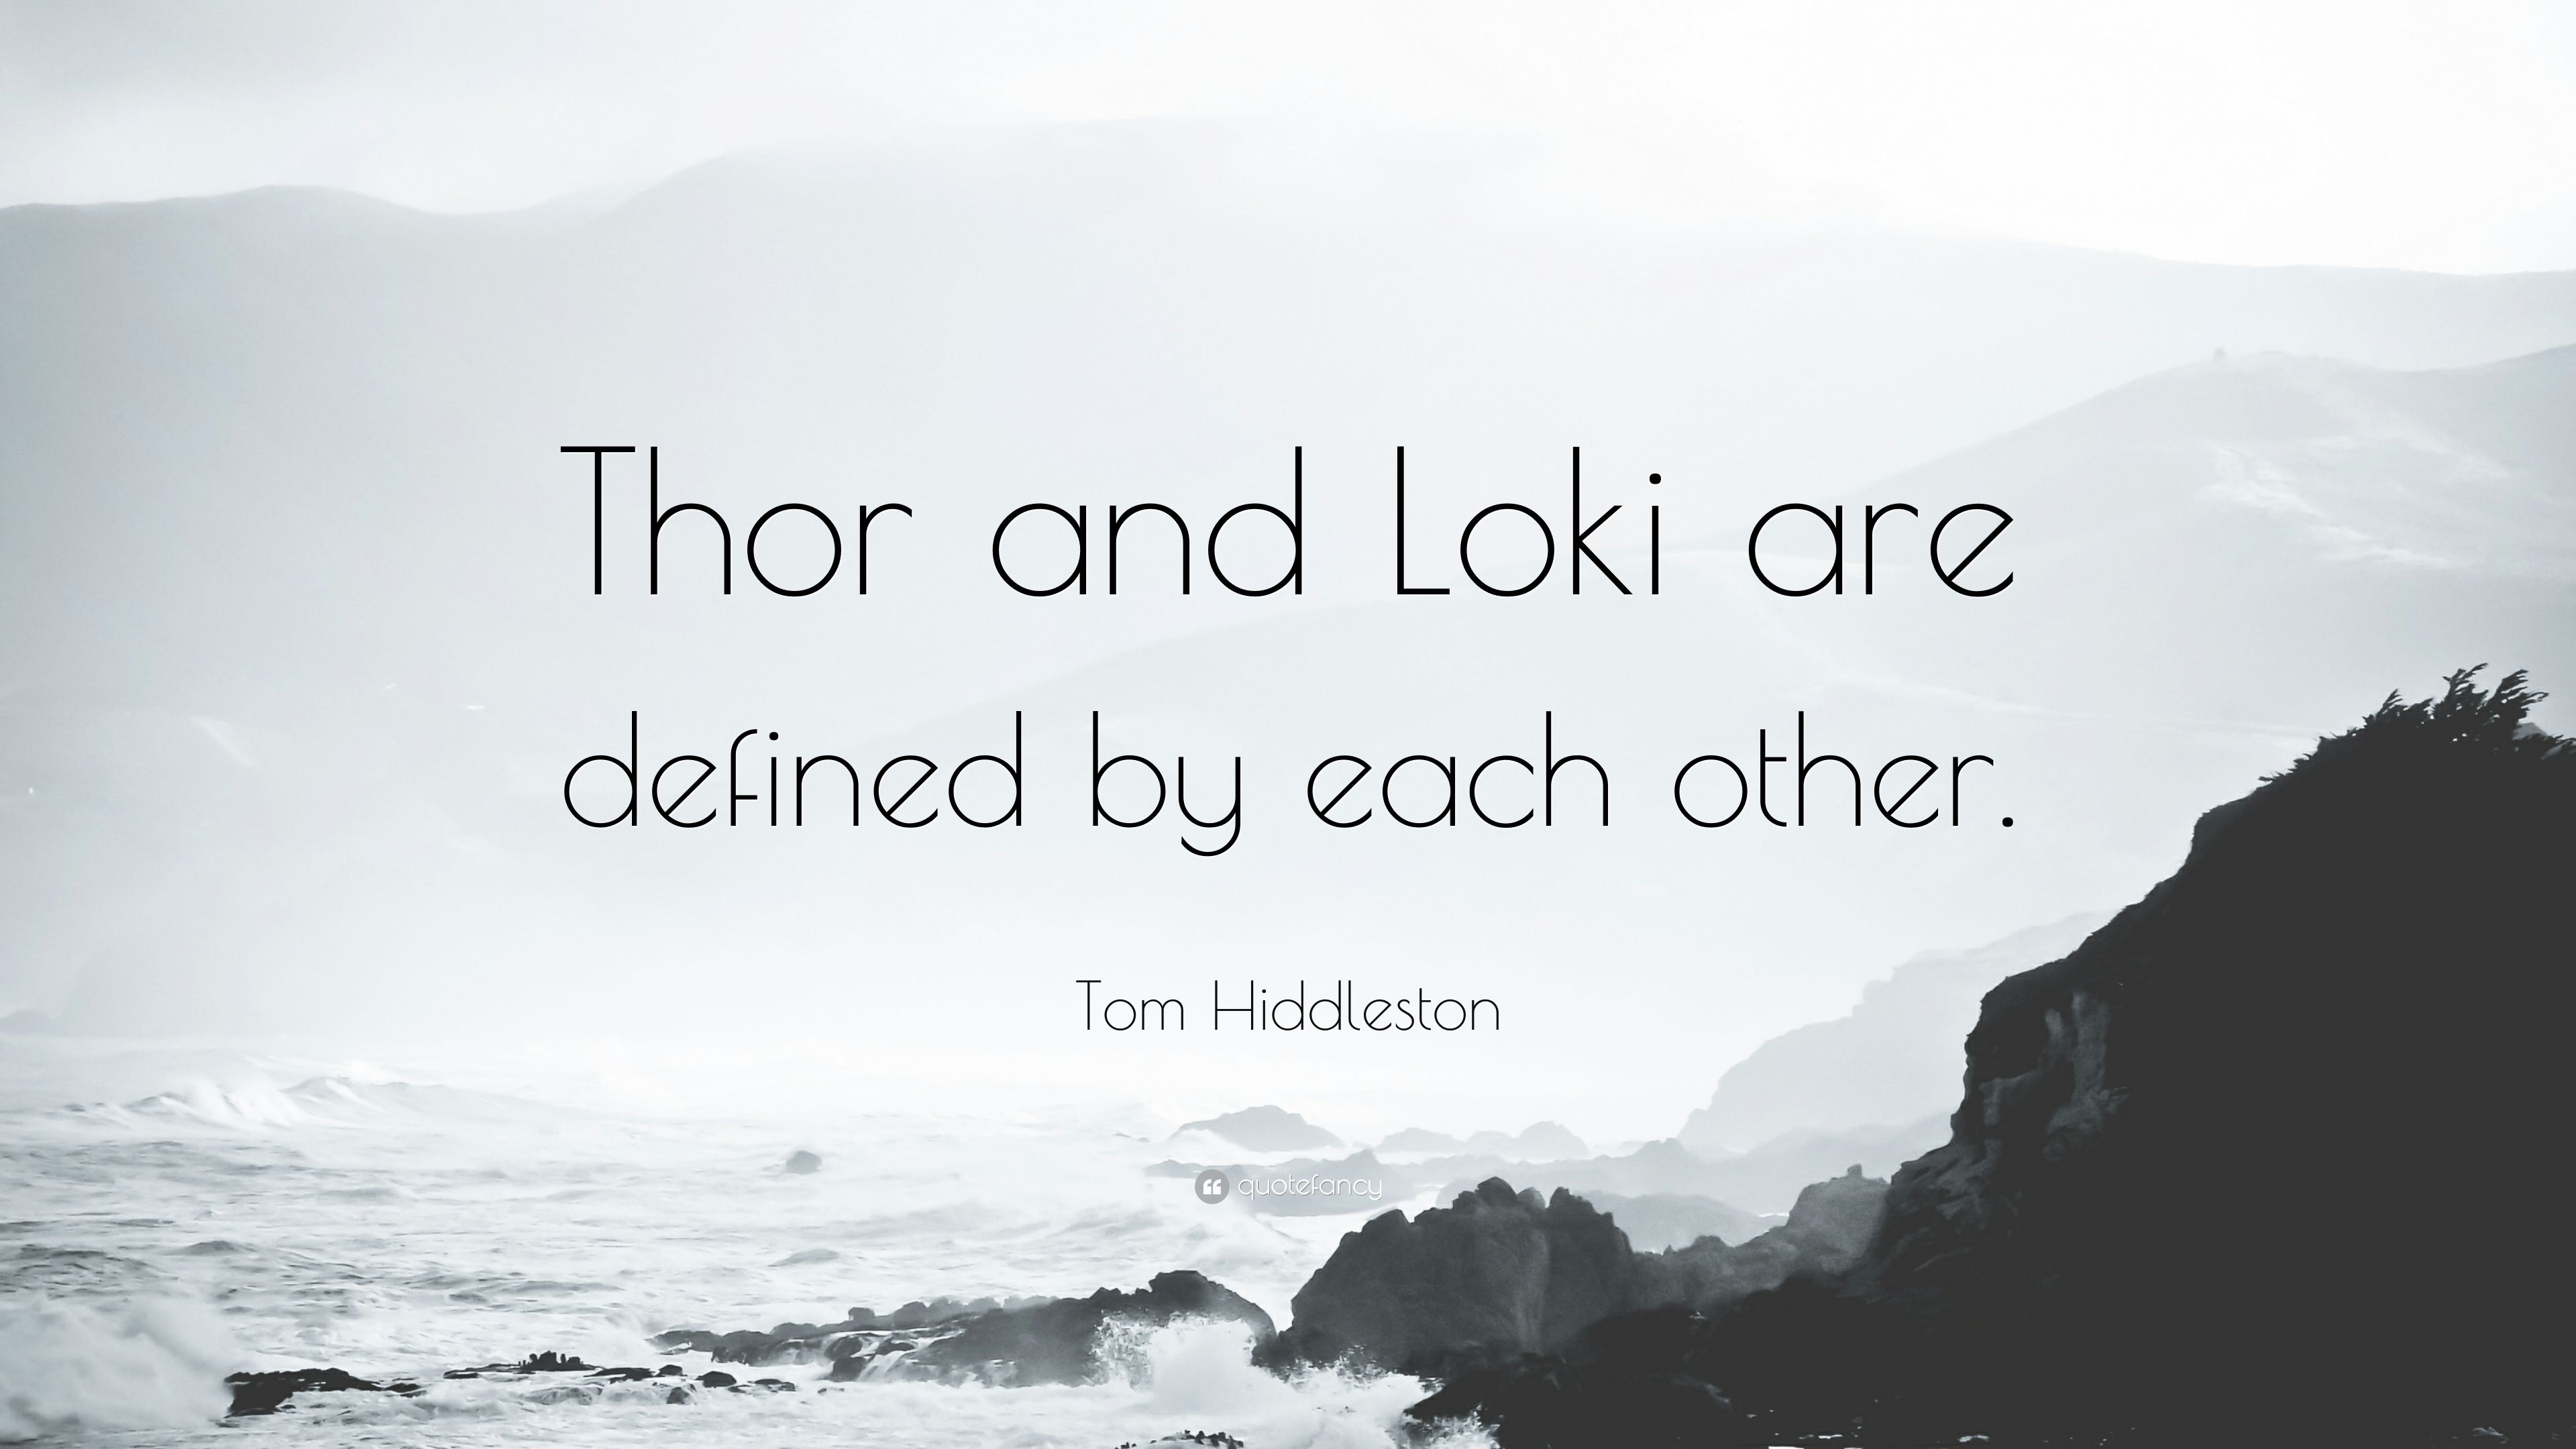 Tom Hiddleston Quote: “Thor and Loki are defined